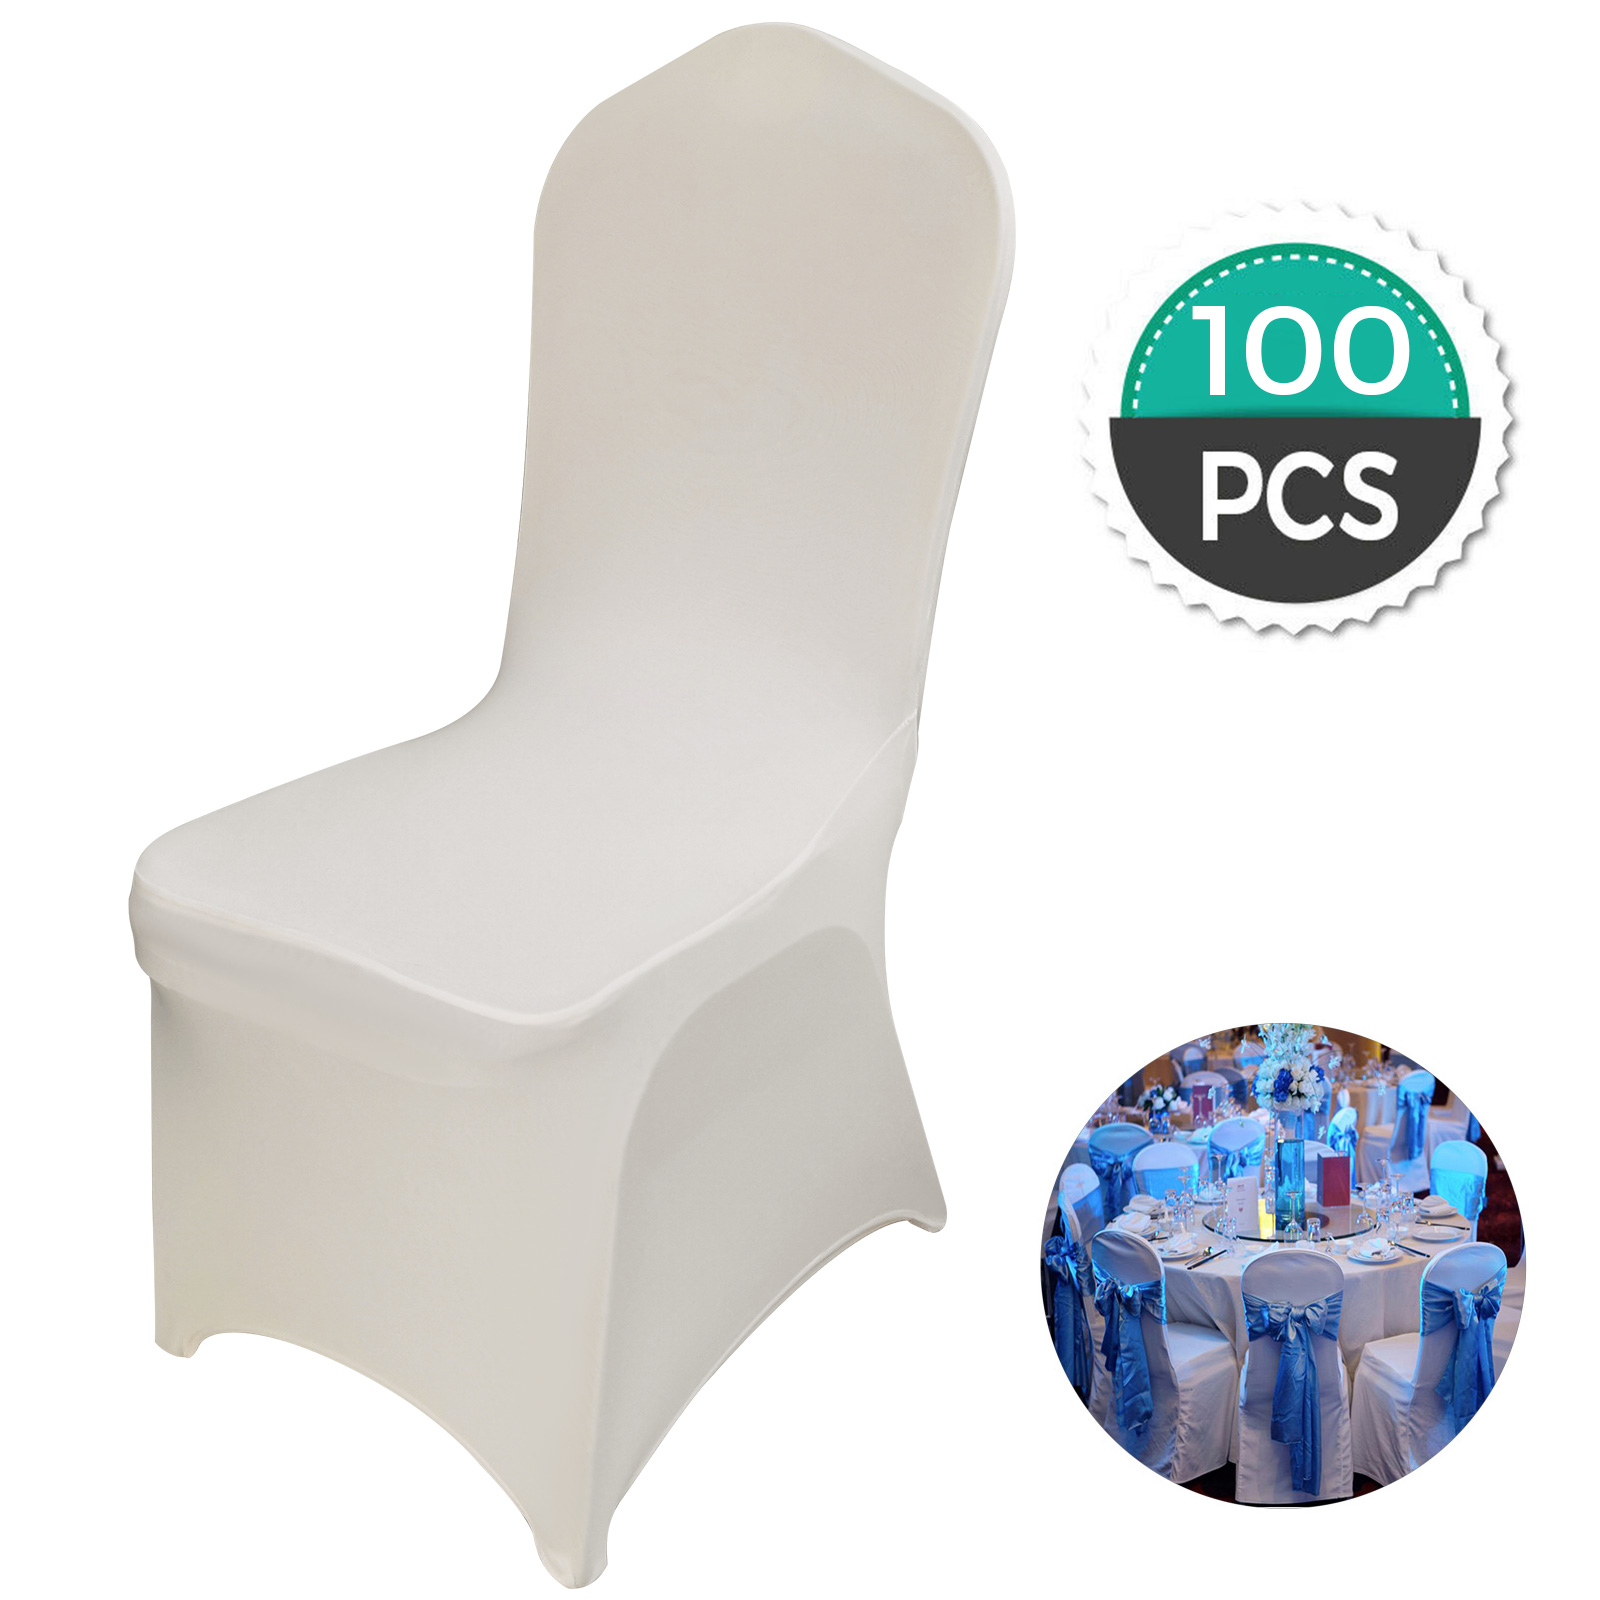 100pcs White Spandex Lycra Chair Cover Wedding Banquet Party FLAT OR ARCH FRONT 